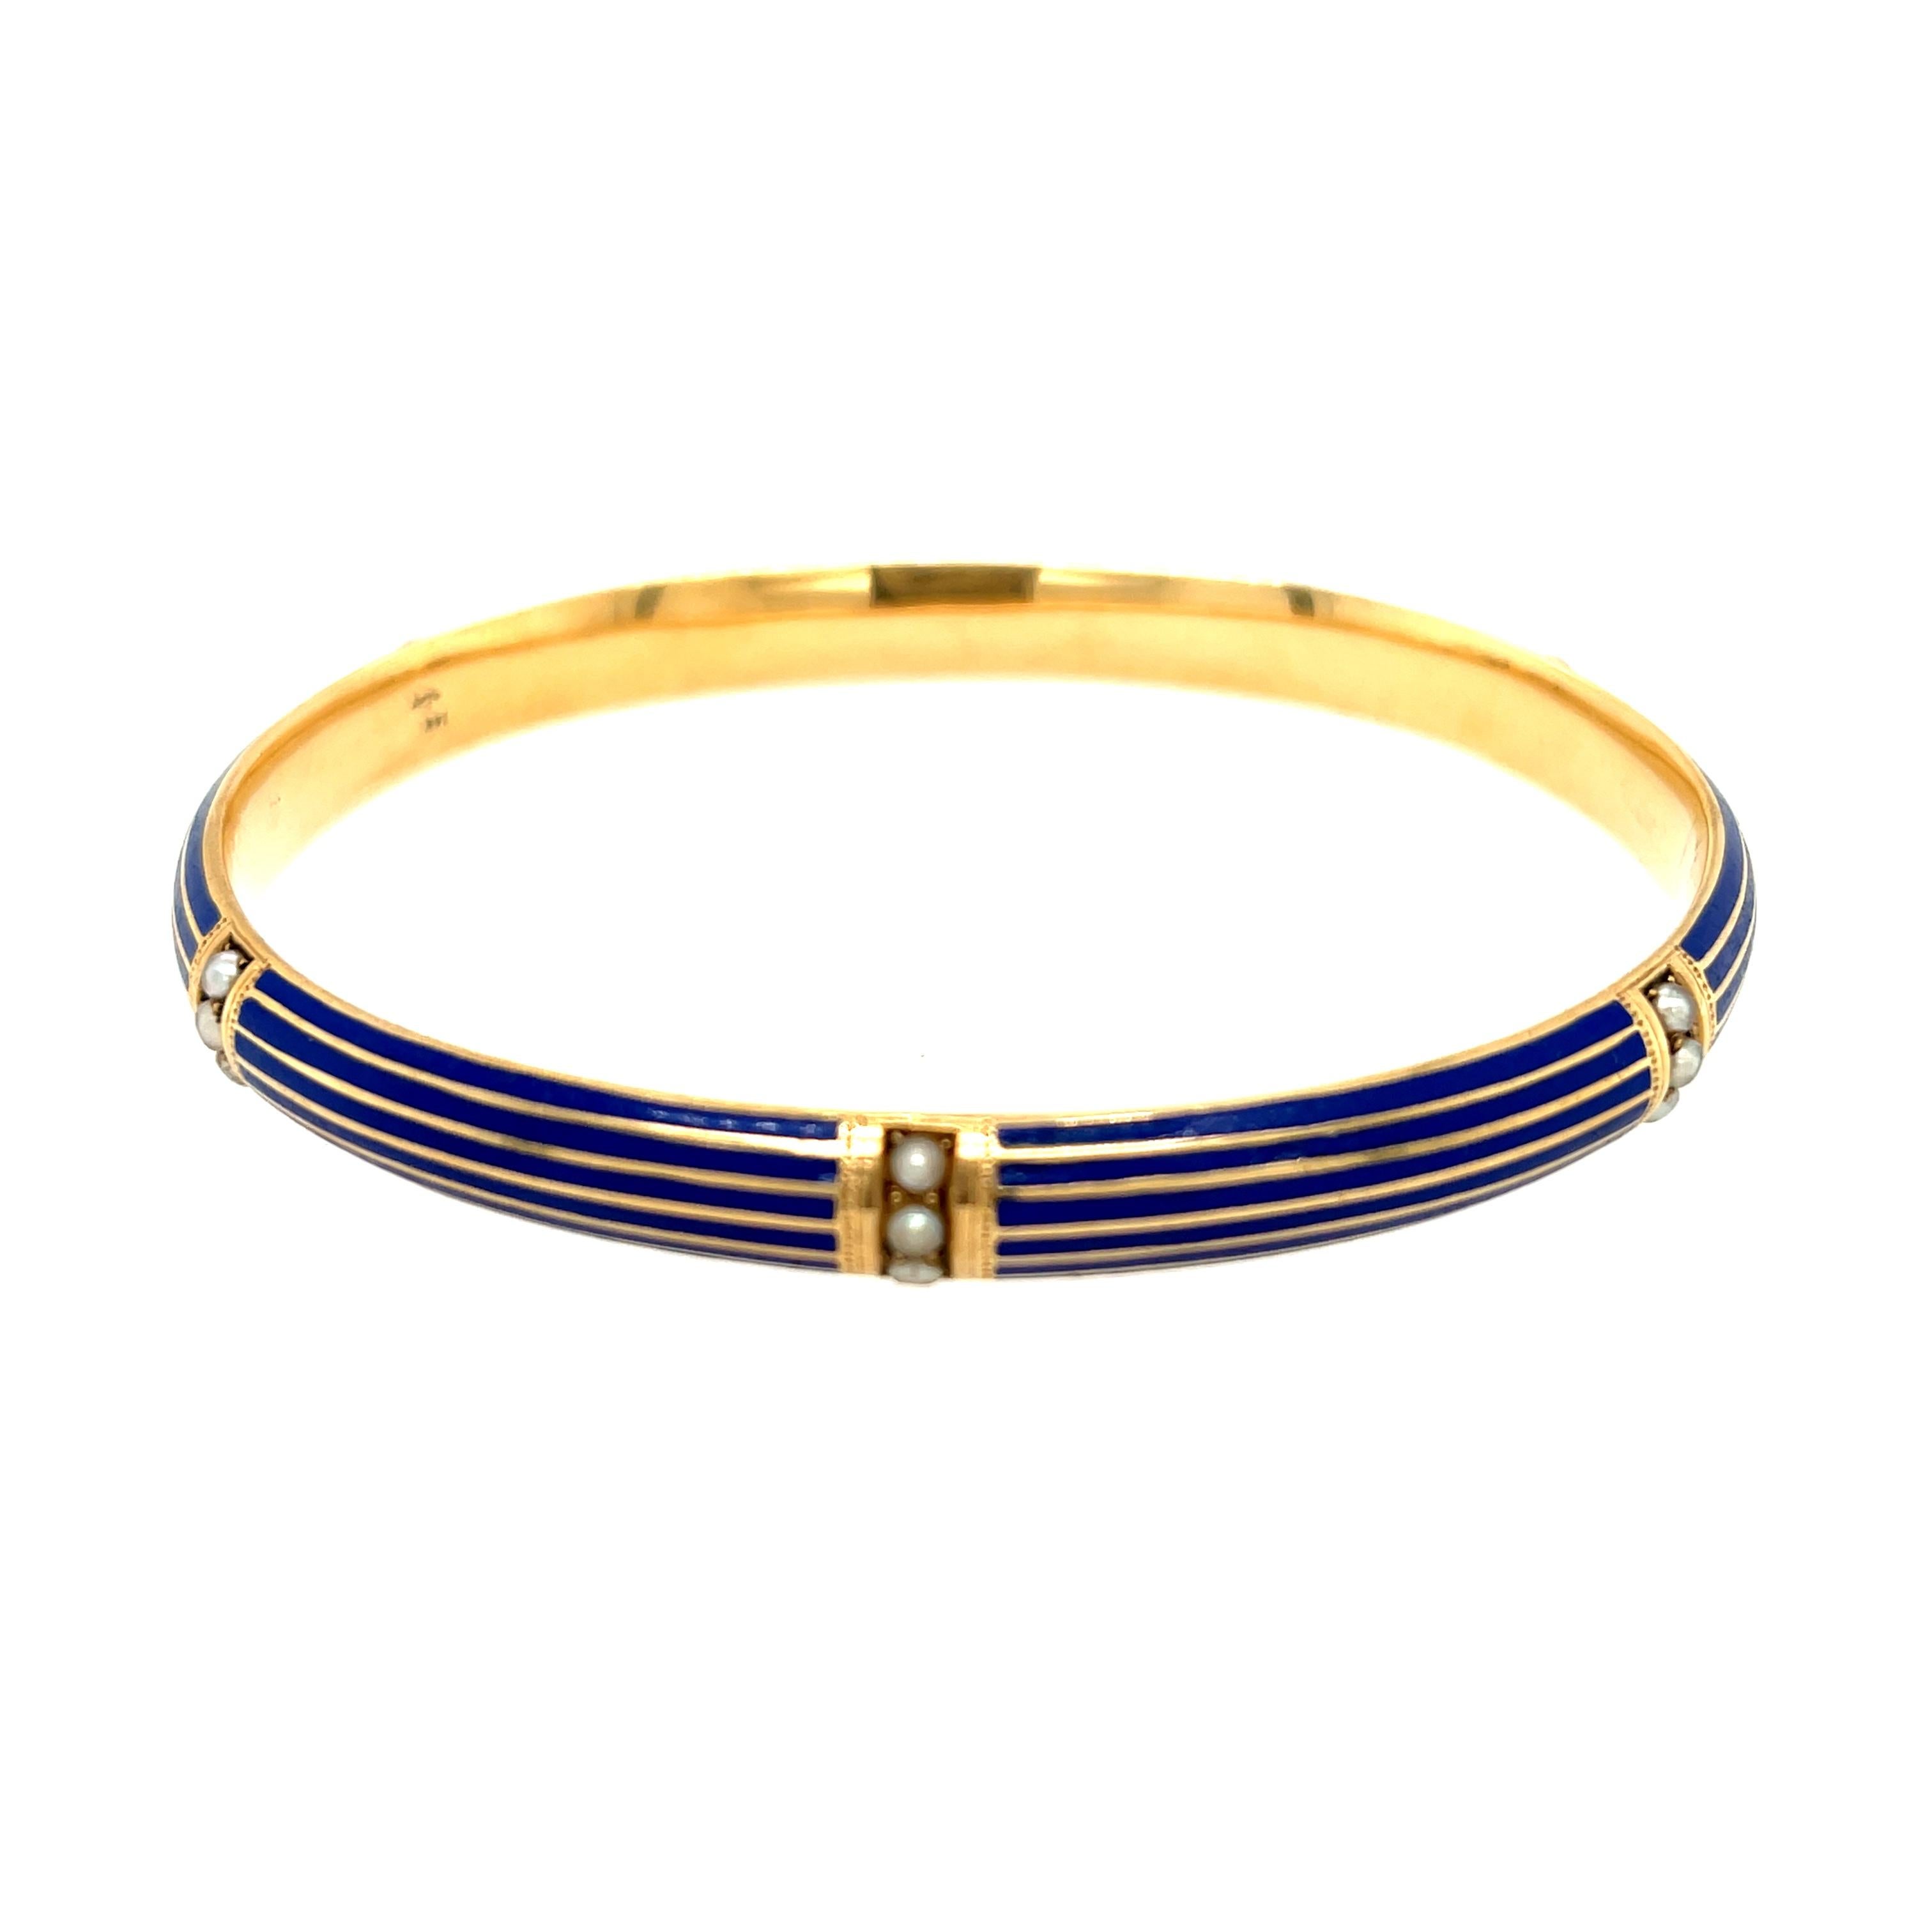 A turn of the century 14k gold blue enamel and seed pearl bangle bracelet by Riker Brothers, circa 1900. This stylish bangle was made by a prominent Newark, New Jersey gold manufacturer. They are well known for making such slip on bangles. This